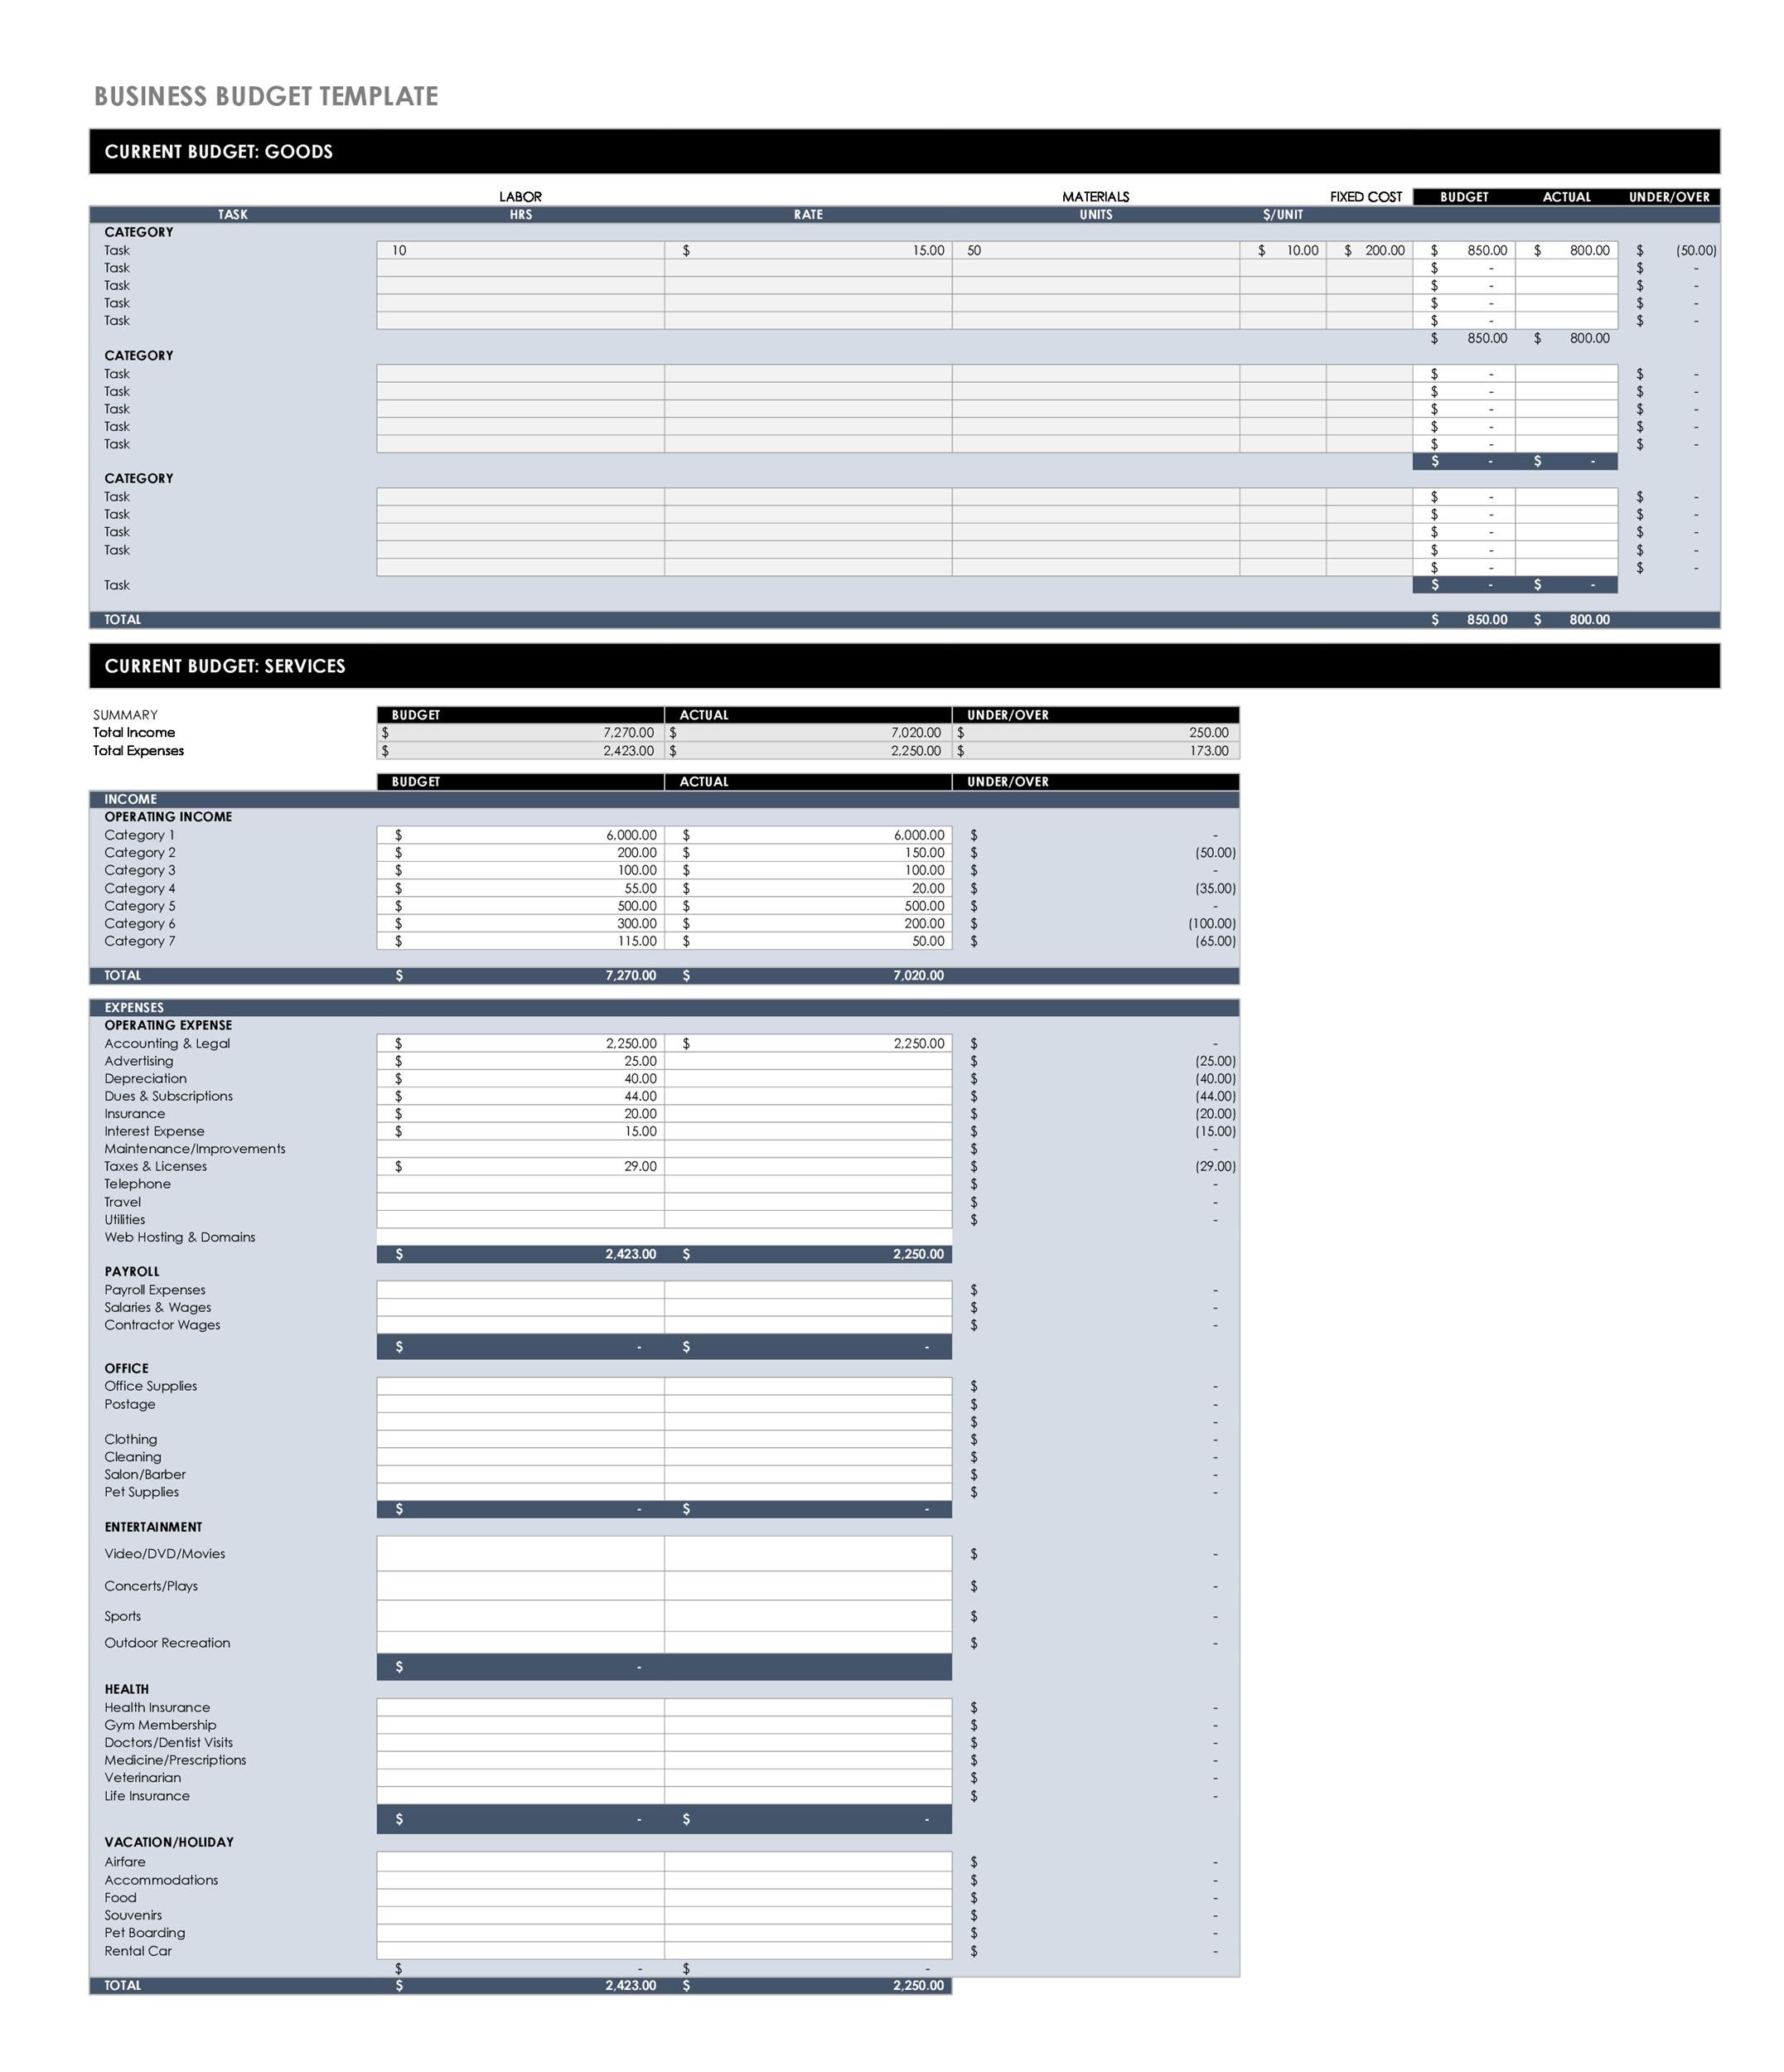 Free business budget template 02